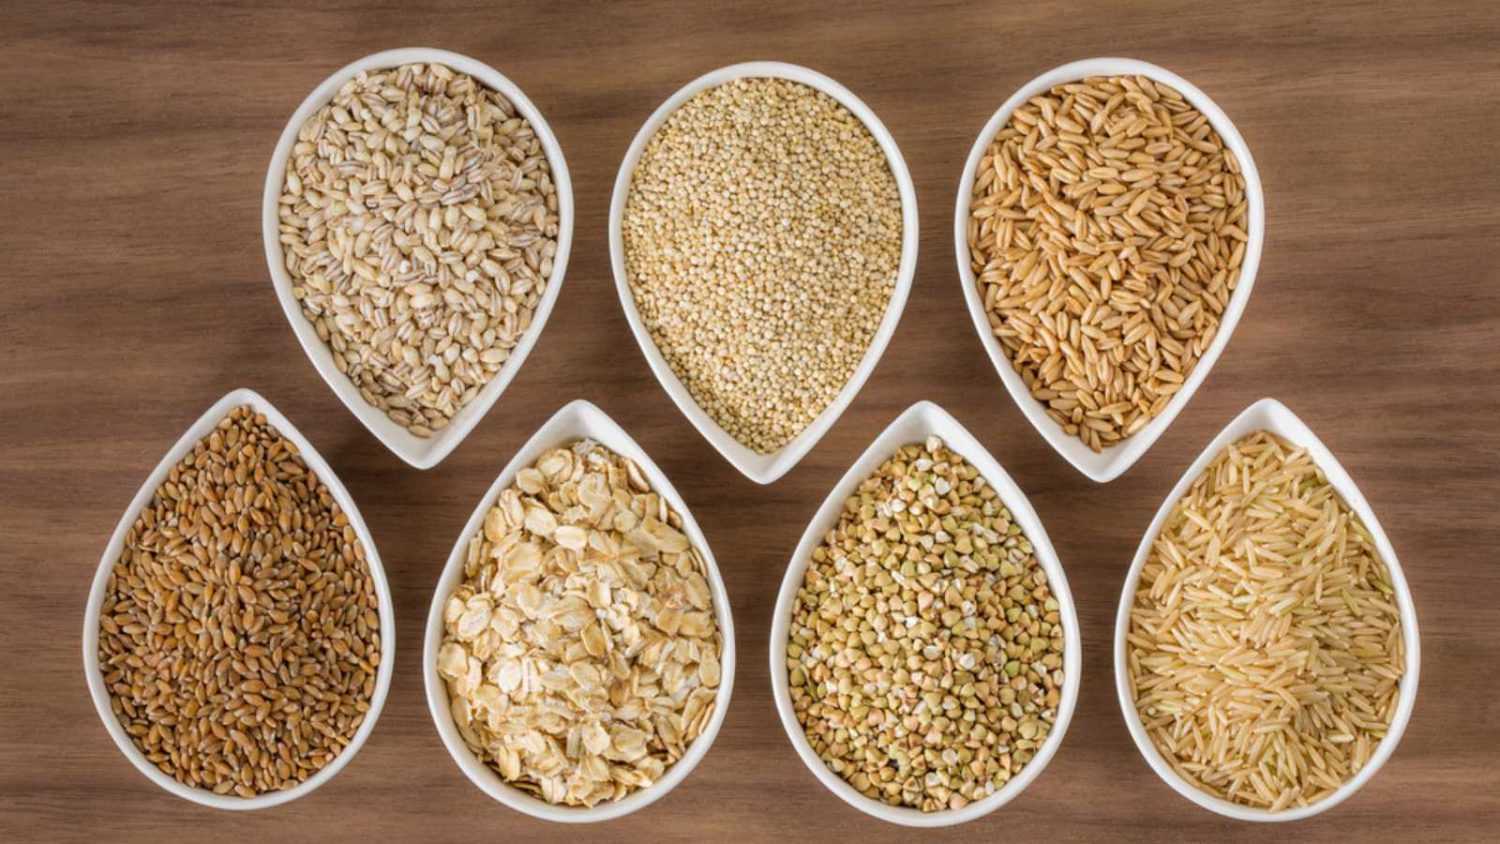 An assortment of whole grains in bowls over a wooden background